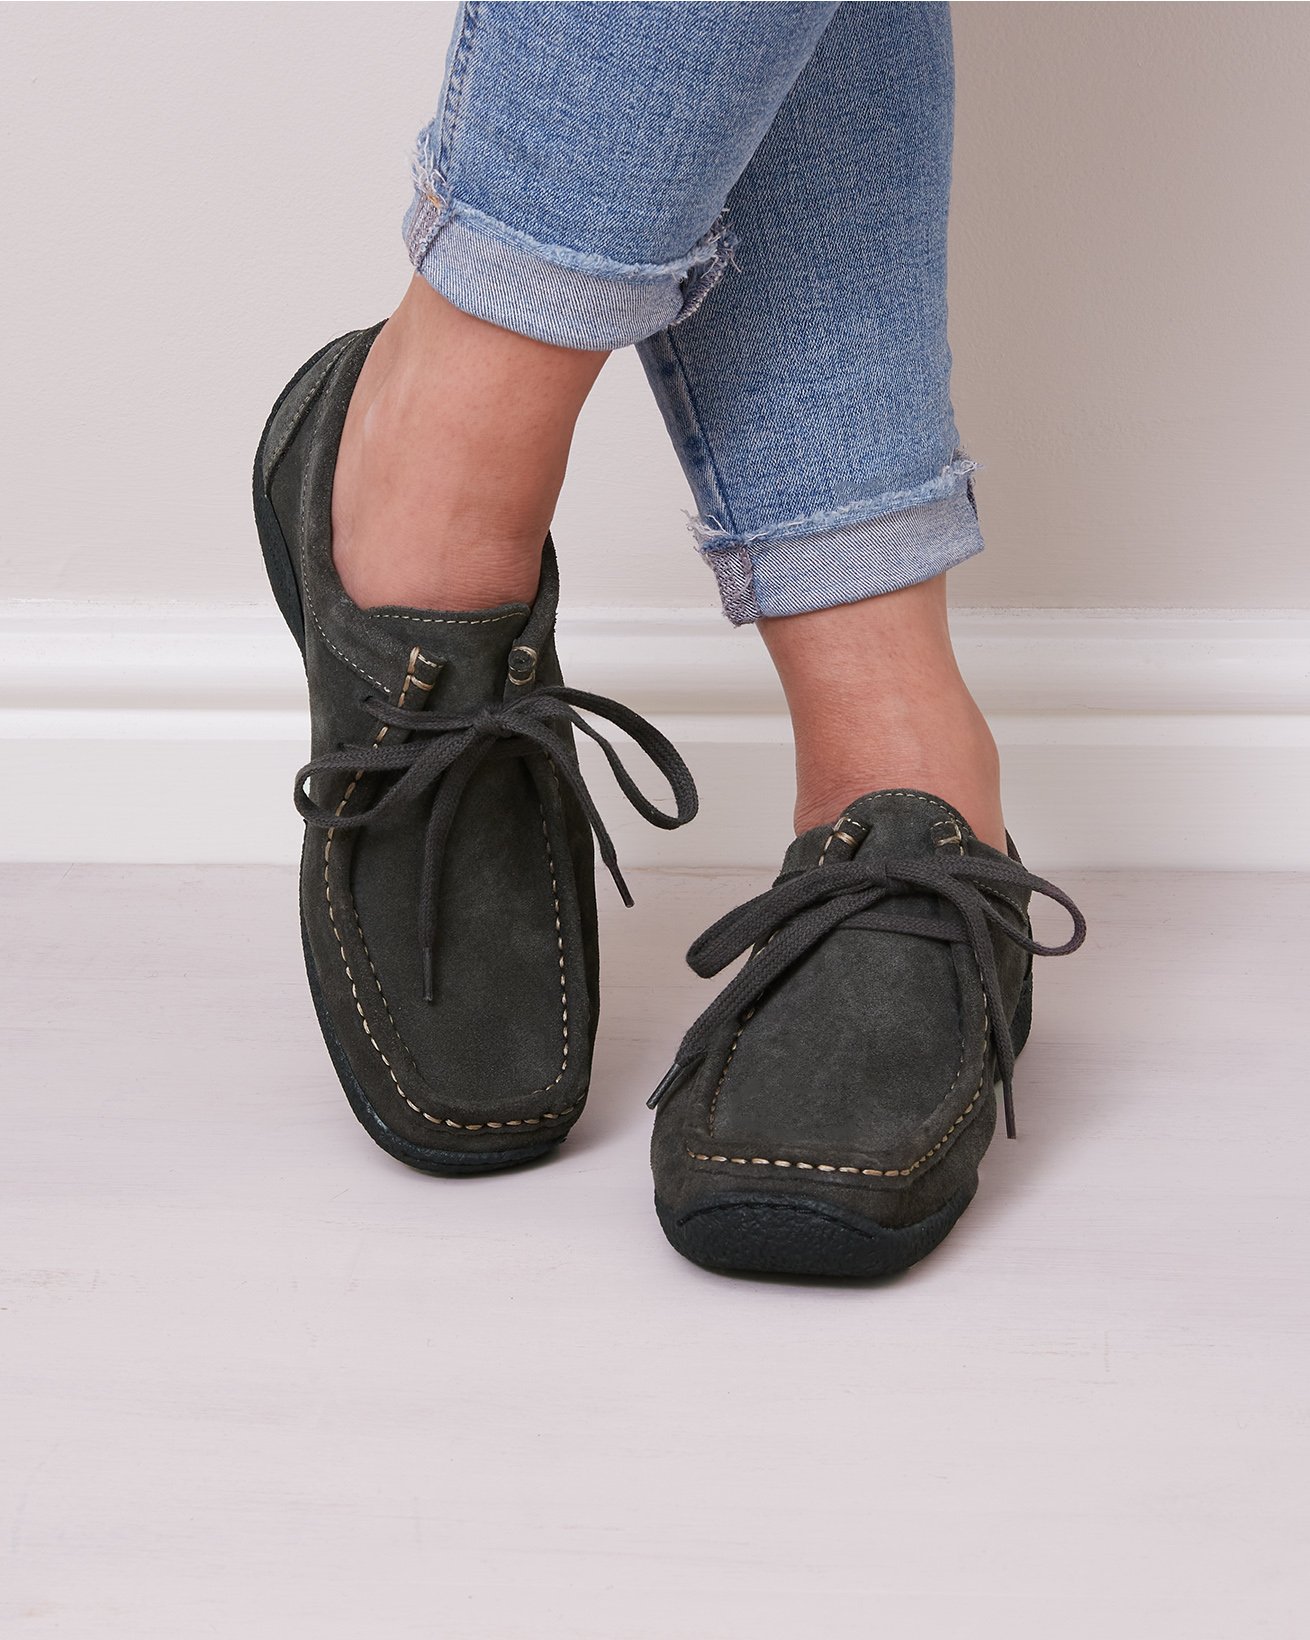 7791_lace-up-moccasin-shoe_charcoal_2 1.jpg